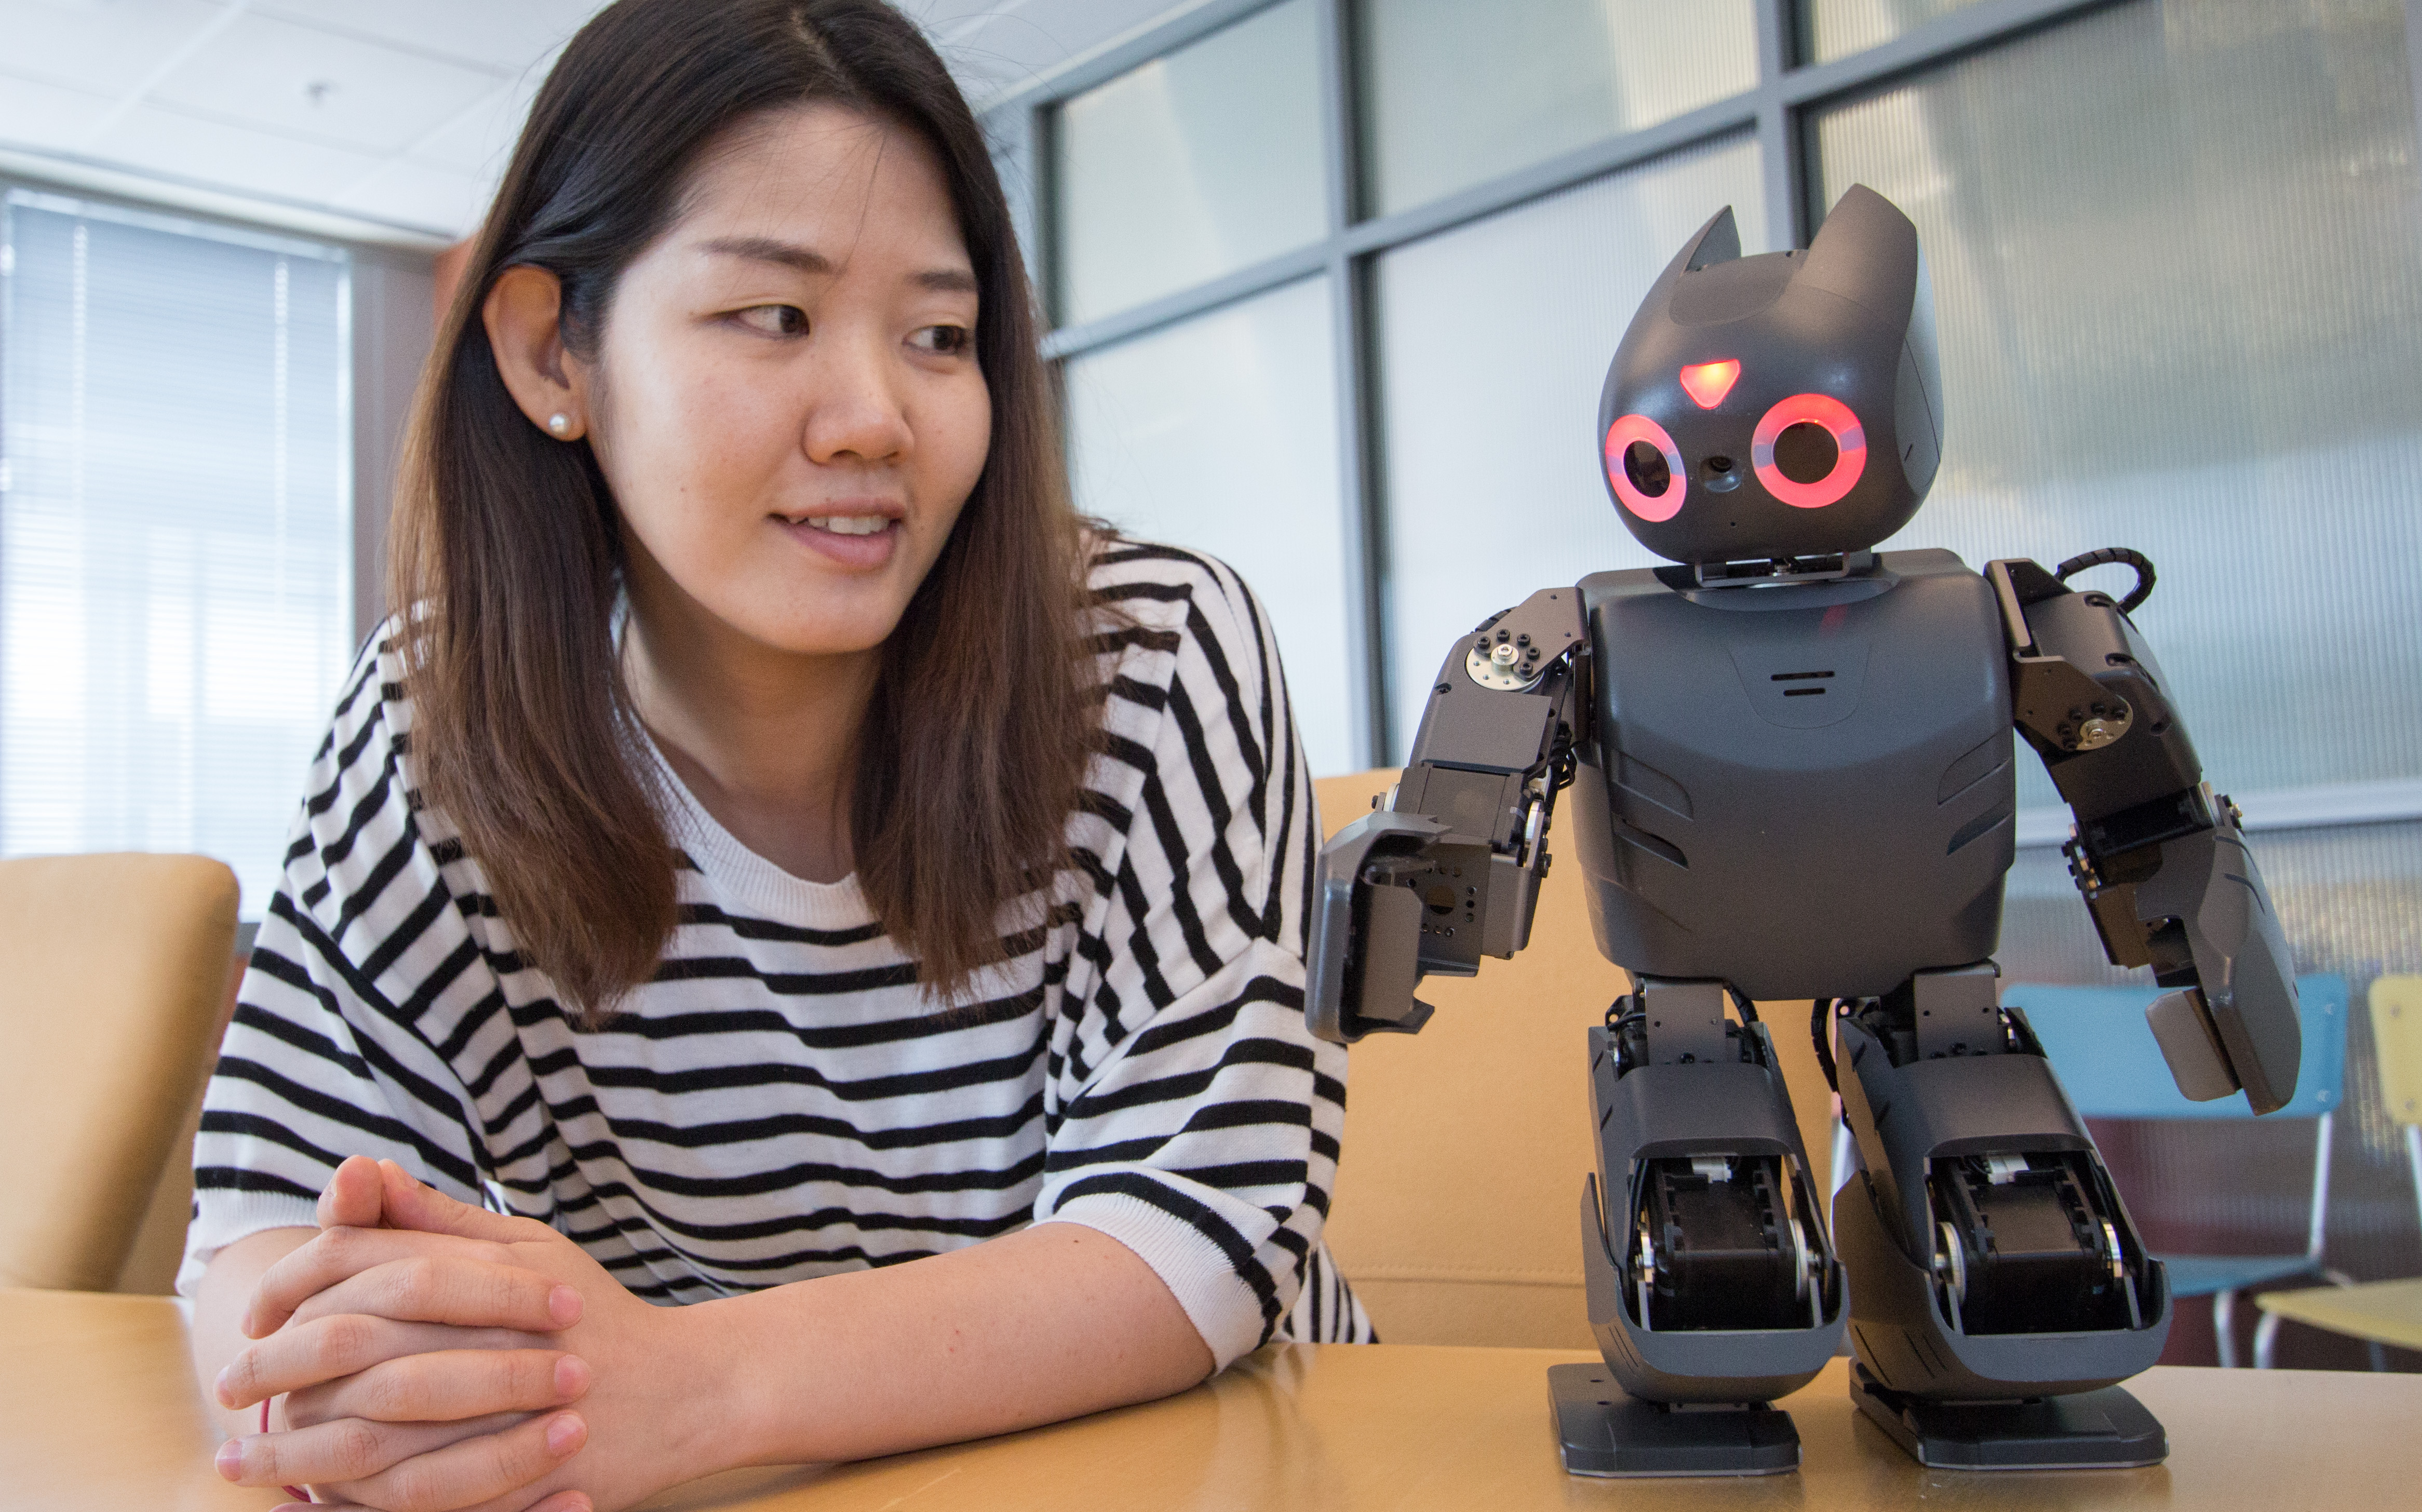 Postdoctoral fellow Hae Won Park (ECE) interacts with robot that can be programmed to learn new skills, including Angry Birds